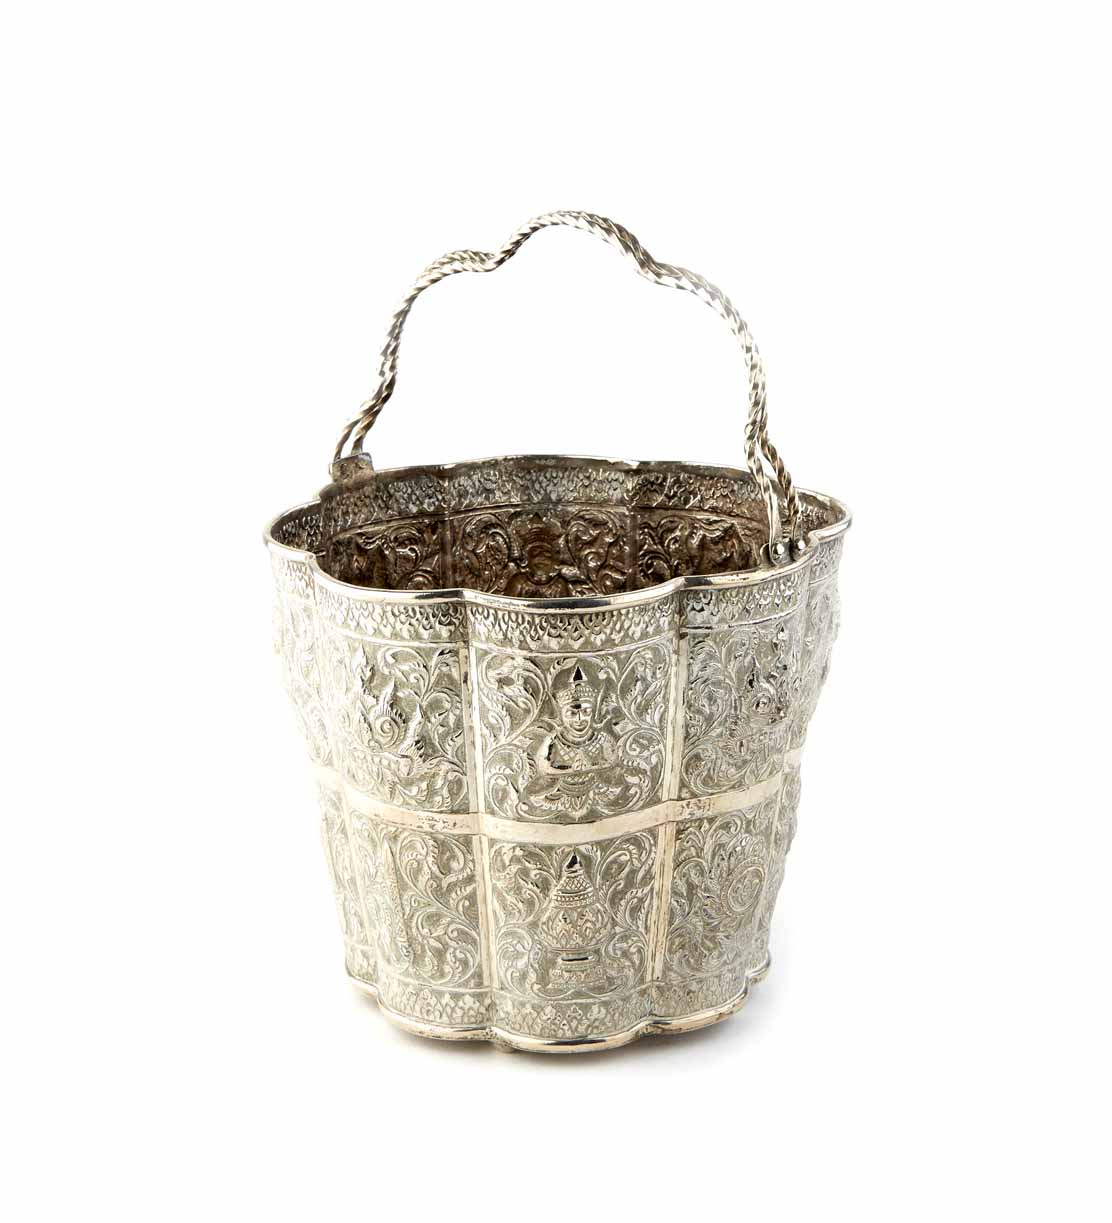 Asian silver bucket, decorated with elaborate floral and foliate repousse work, decorative panels